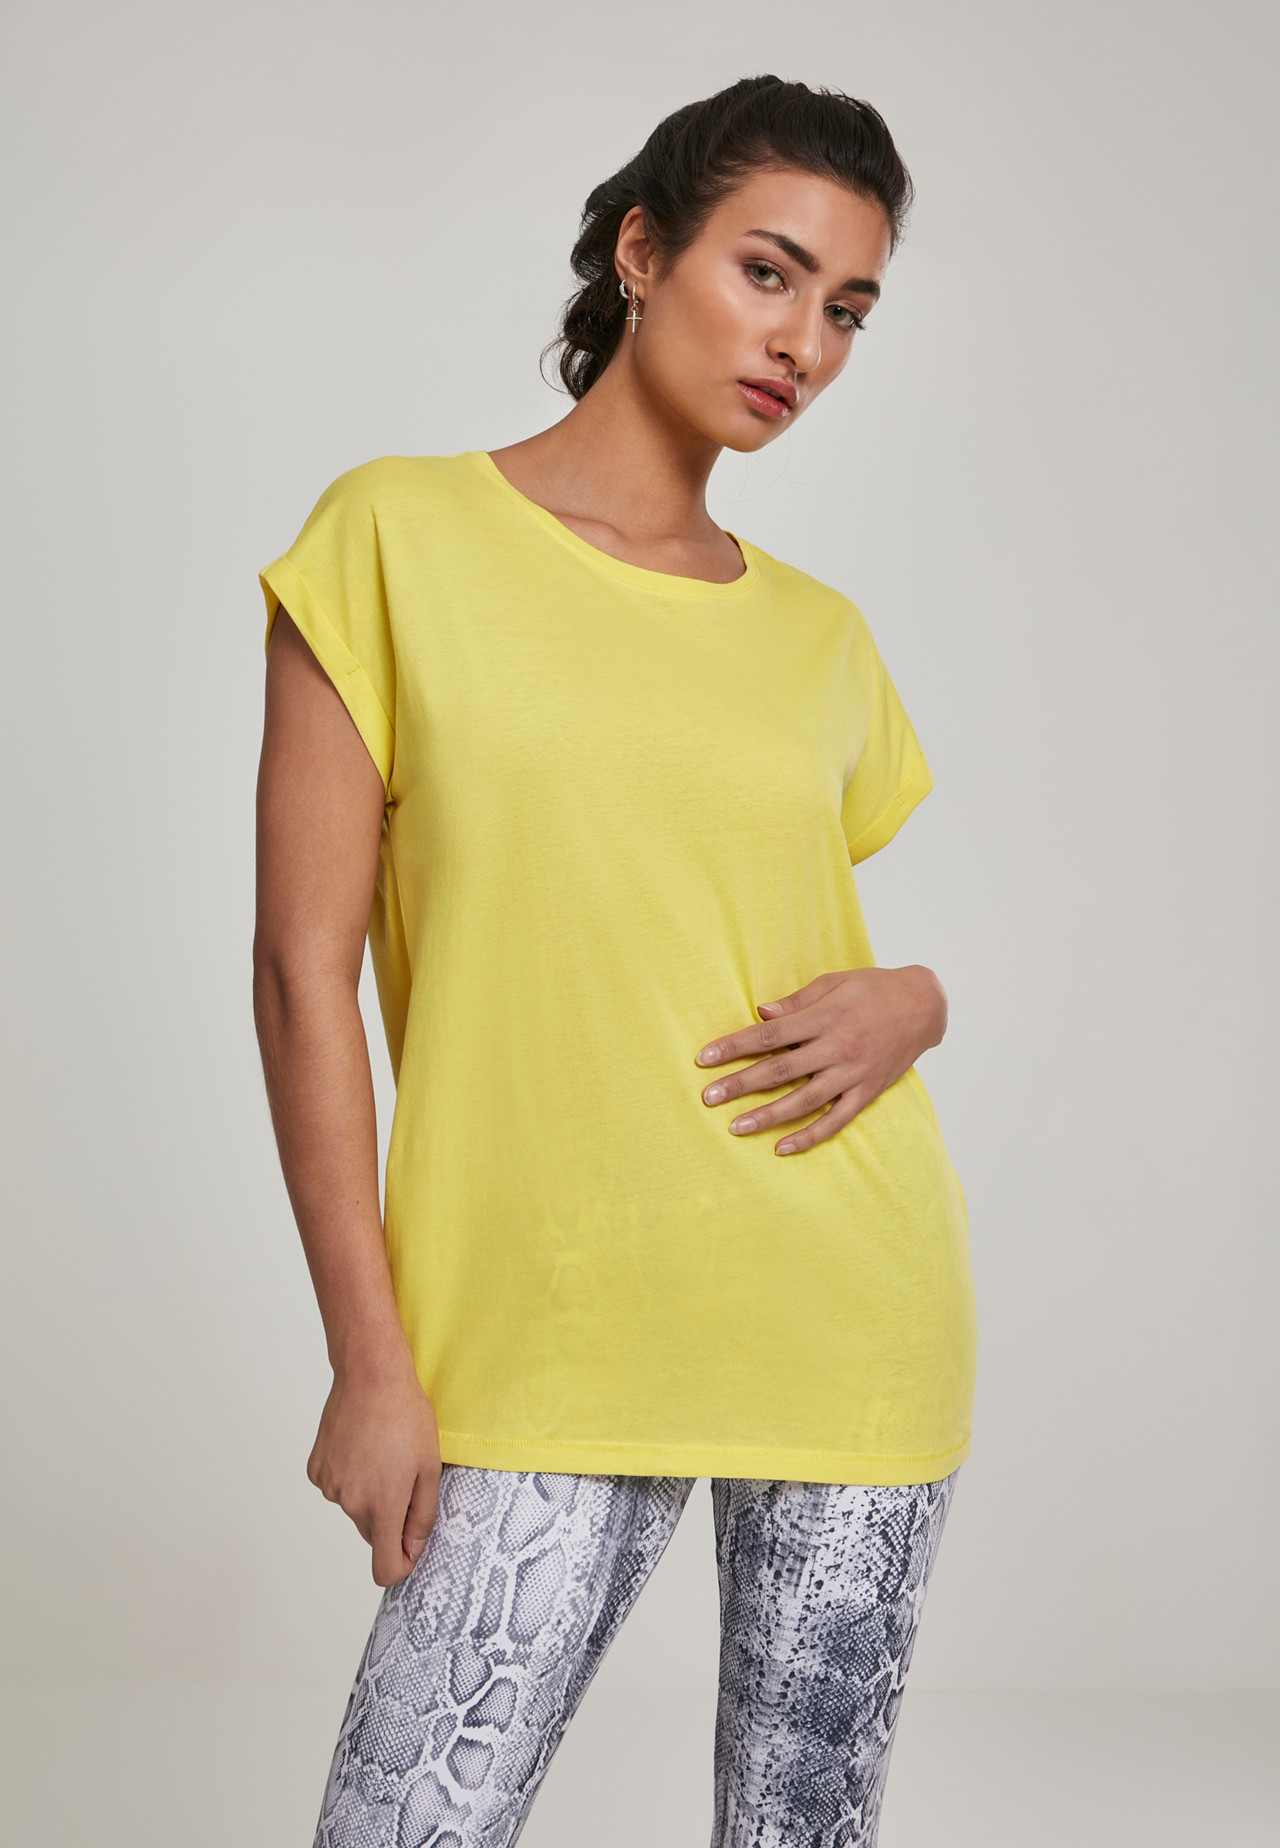 Urban Classics Ladies Extended Shoulder Tee (Bright Yellow, S)